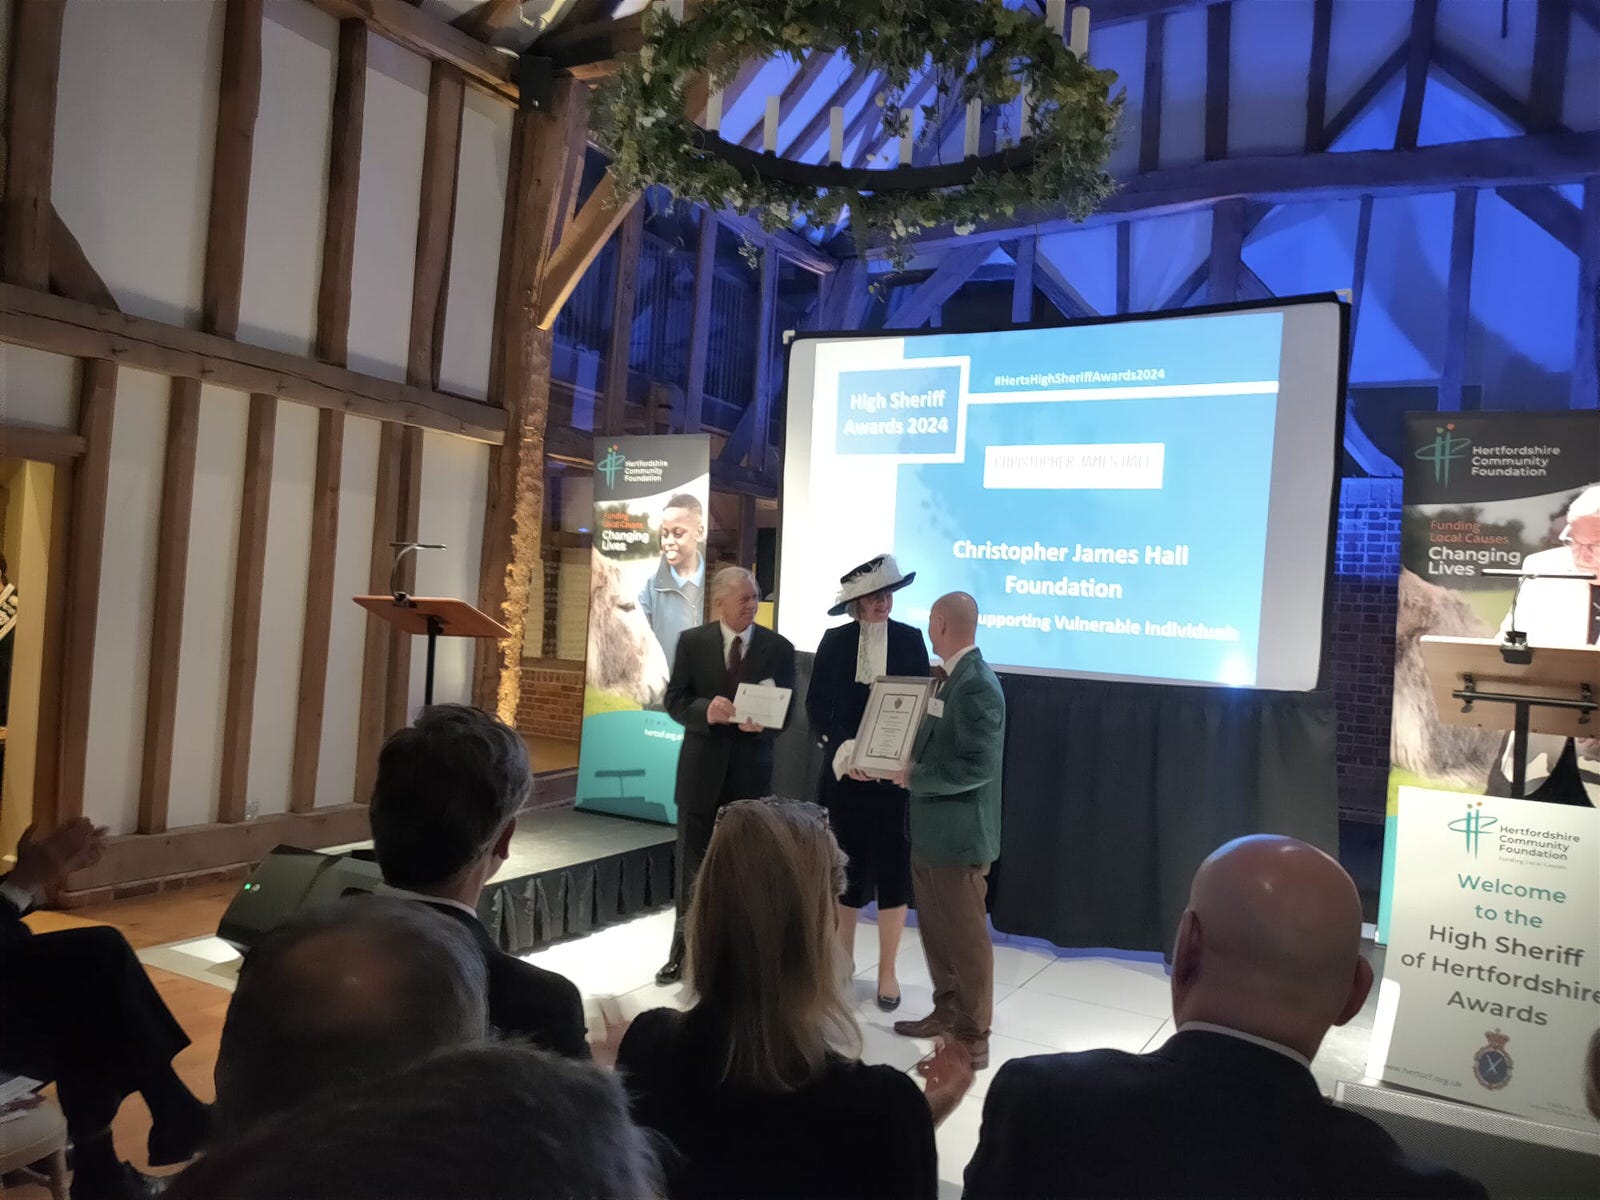 Foundation Receives High Sheriff's Award 2024 A Triumph of Community Empowerment